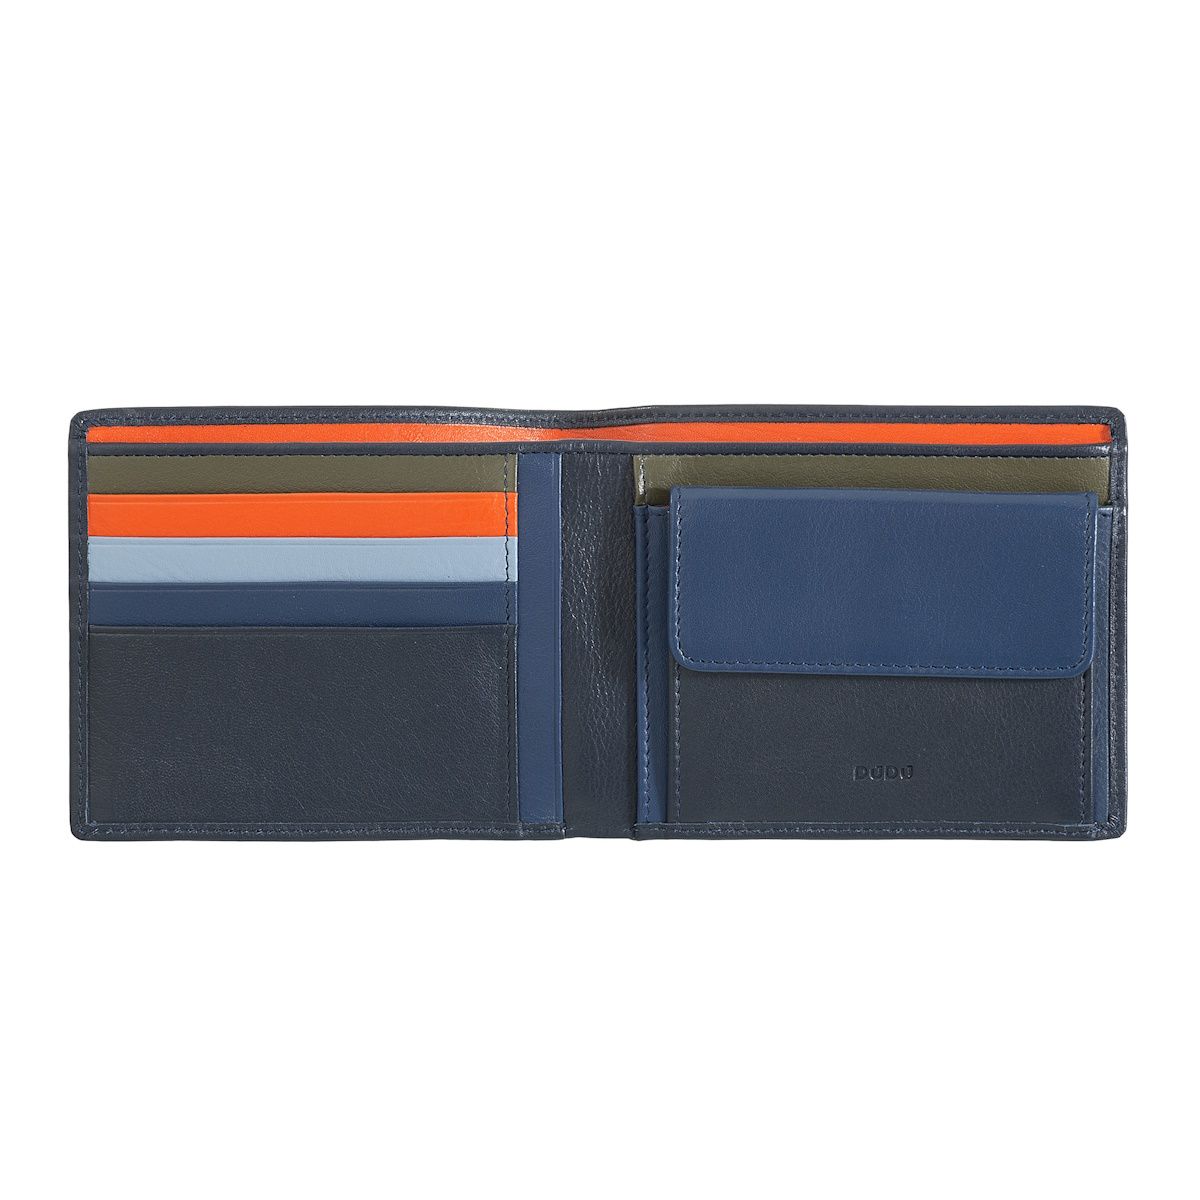 DuDu Slim Leather Multi Color Callet With Coin Purse - Navy